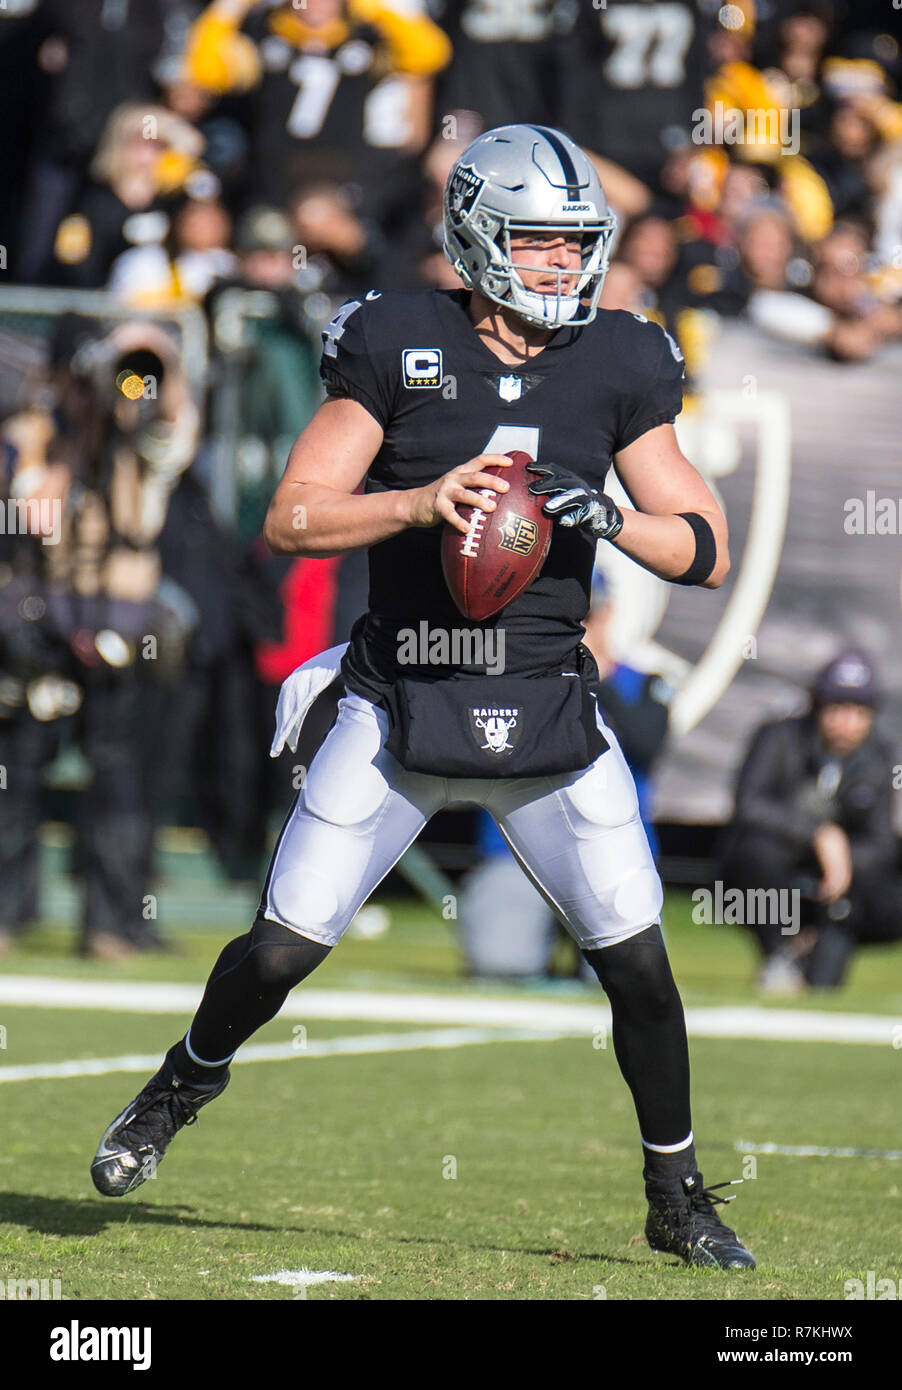 Dec 09 2018 Oakland U.S.A CA Oakland Raiders quarterback Derek Carr (4) looks for short pass during the NFL Football game between Pittsburgh Steelers and the Oakland Raiders 24-21 win at O.co Coliseum Stadium Oakland Calif. Thurman James/CSM Stock Photo